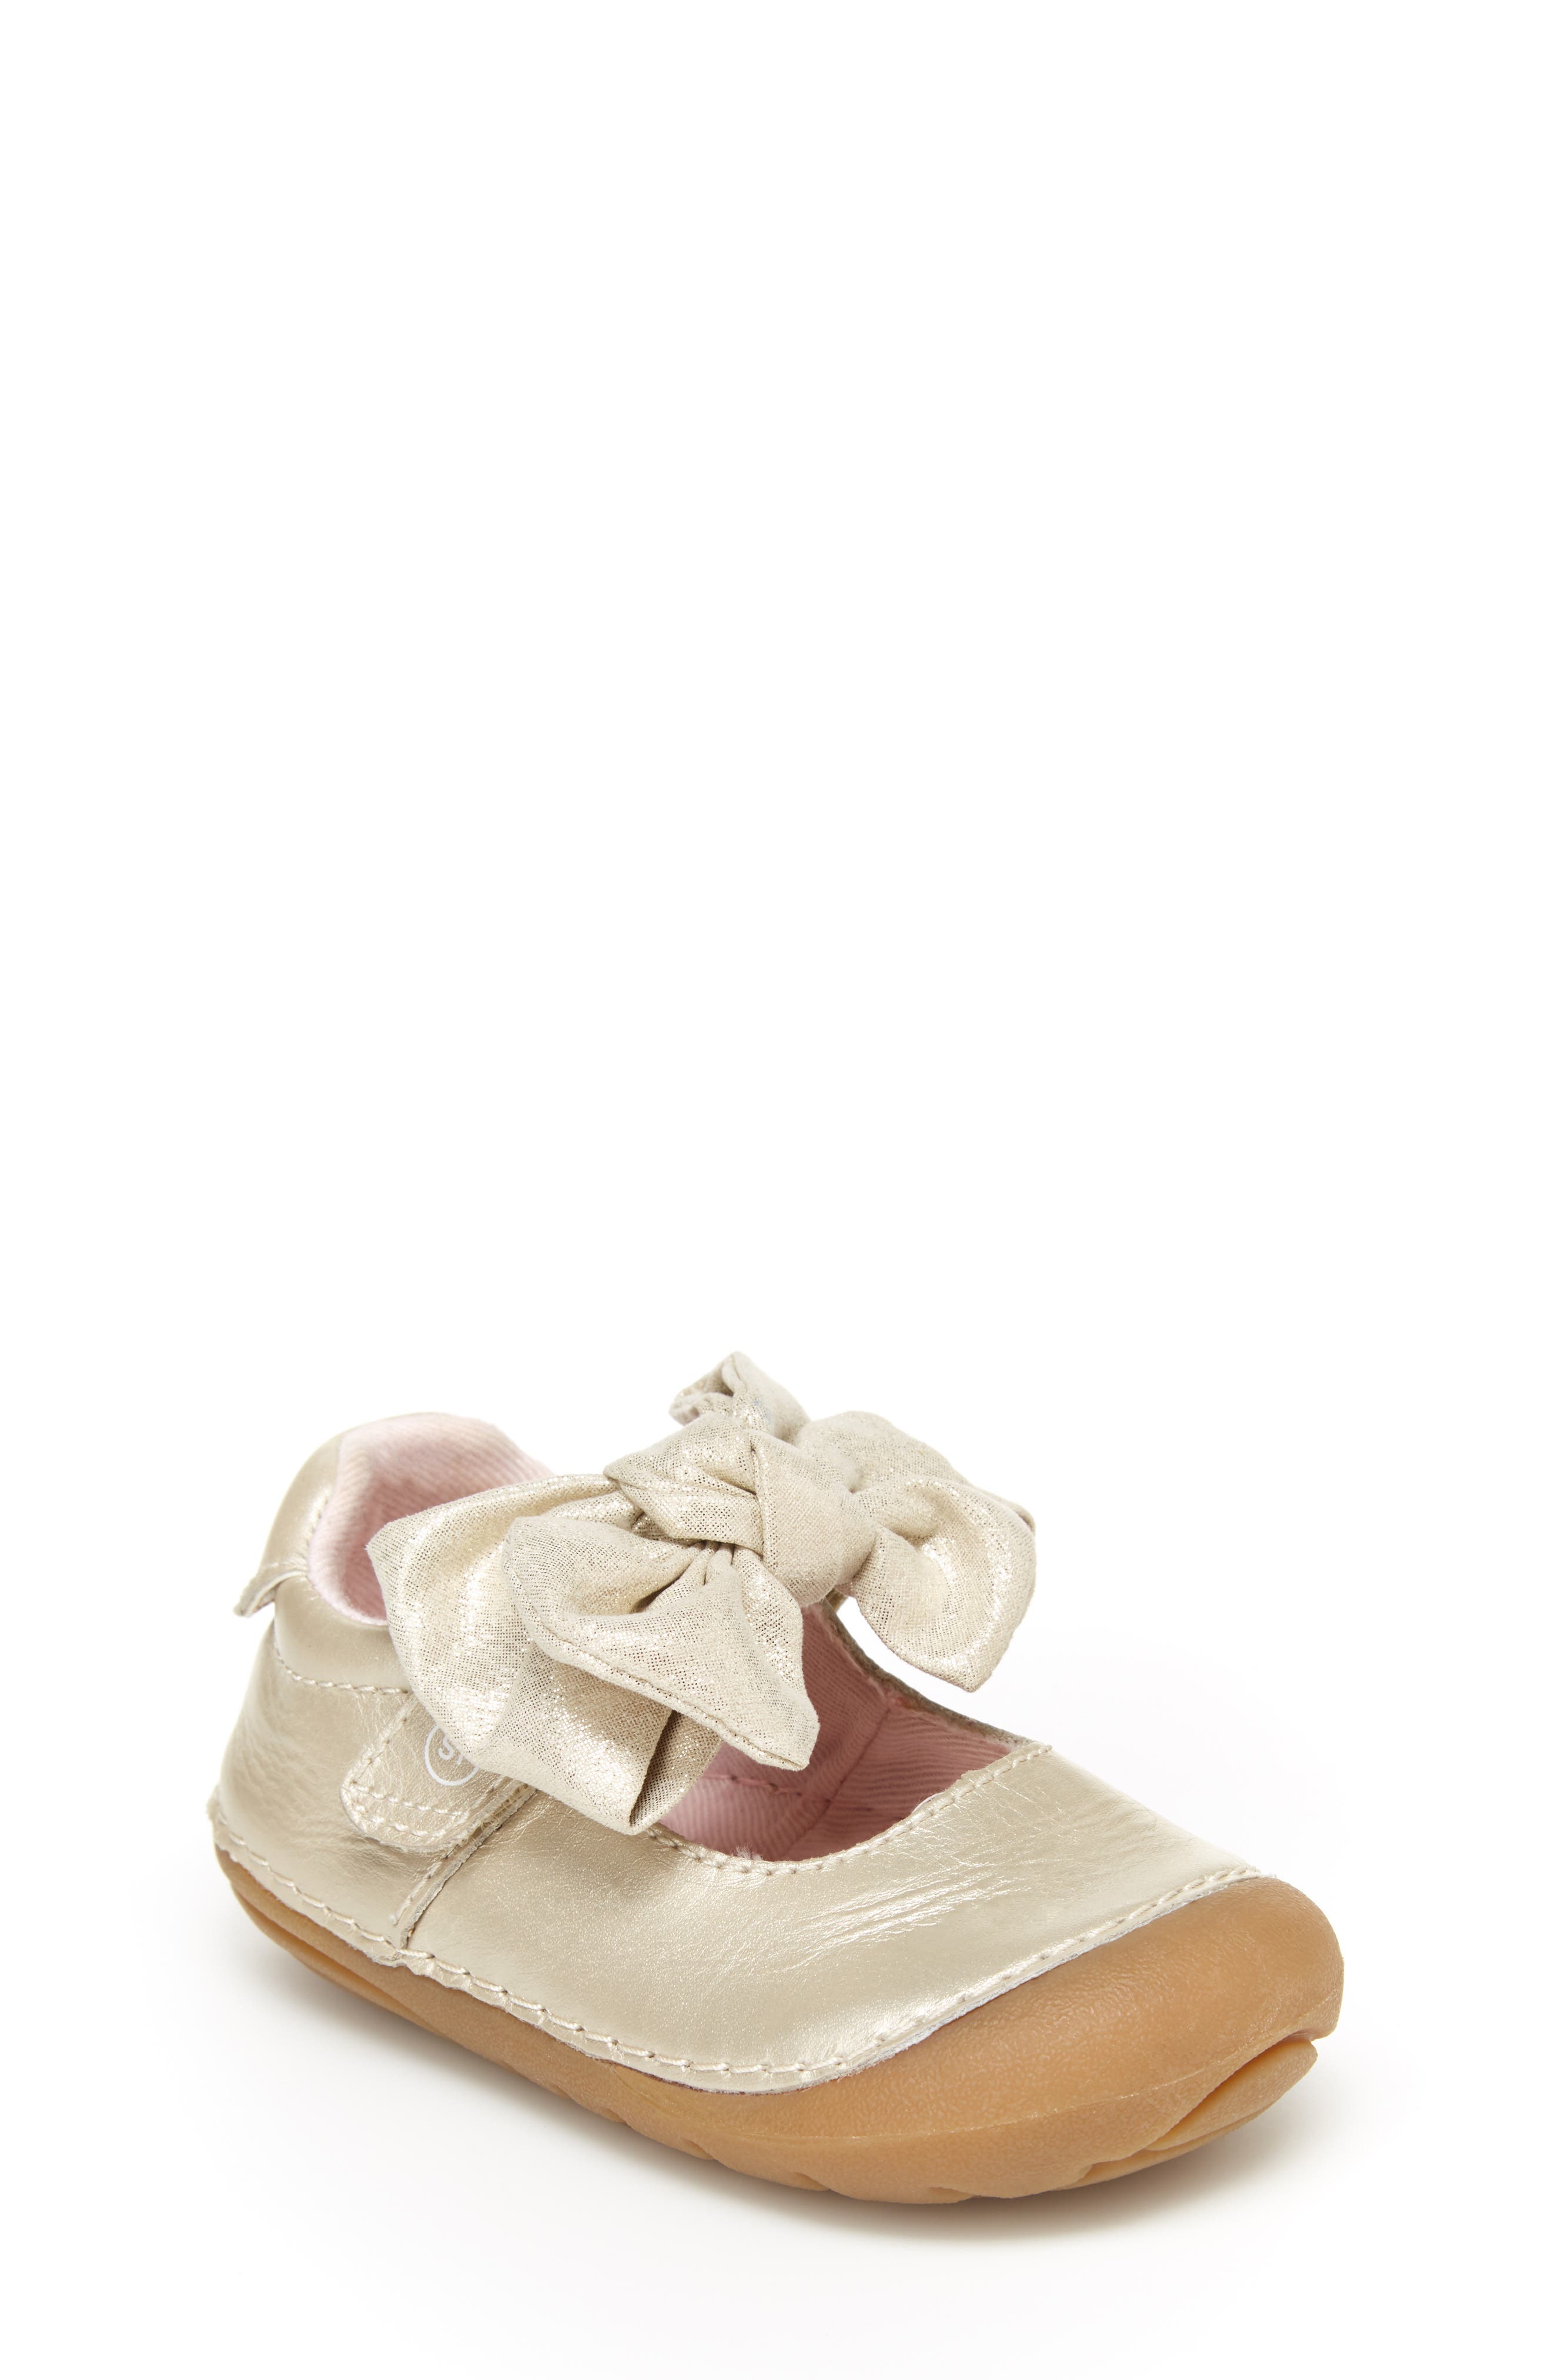 baby shoes arch support